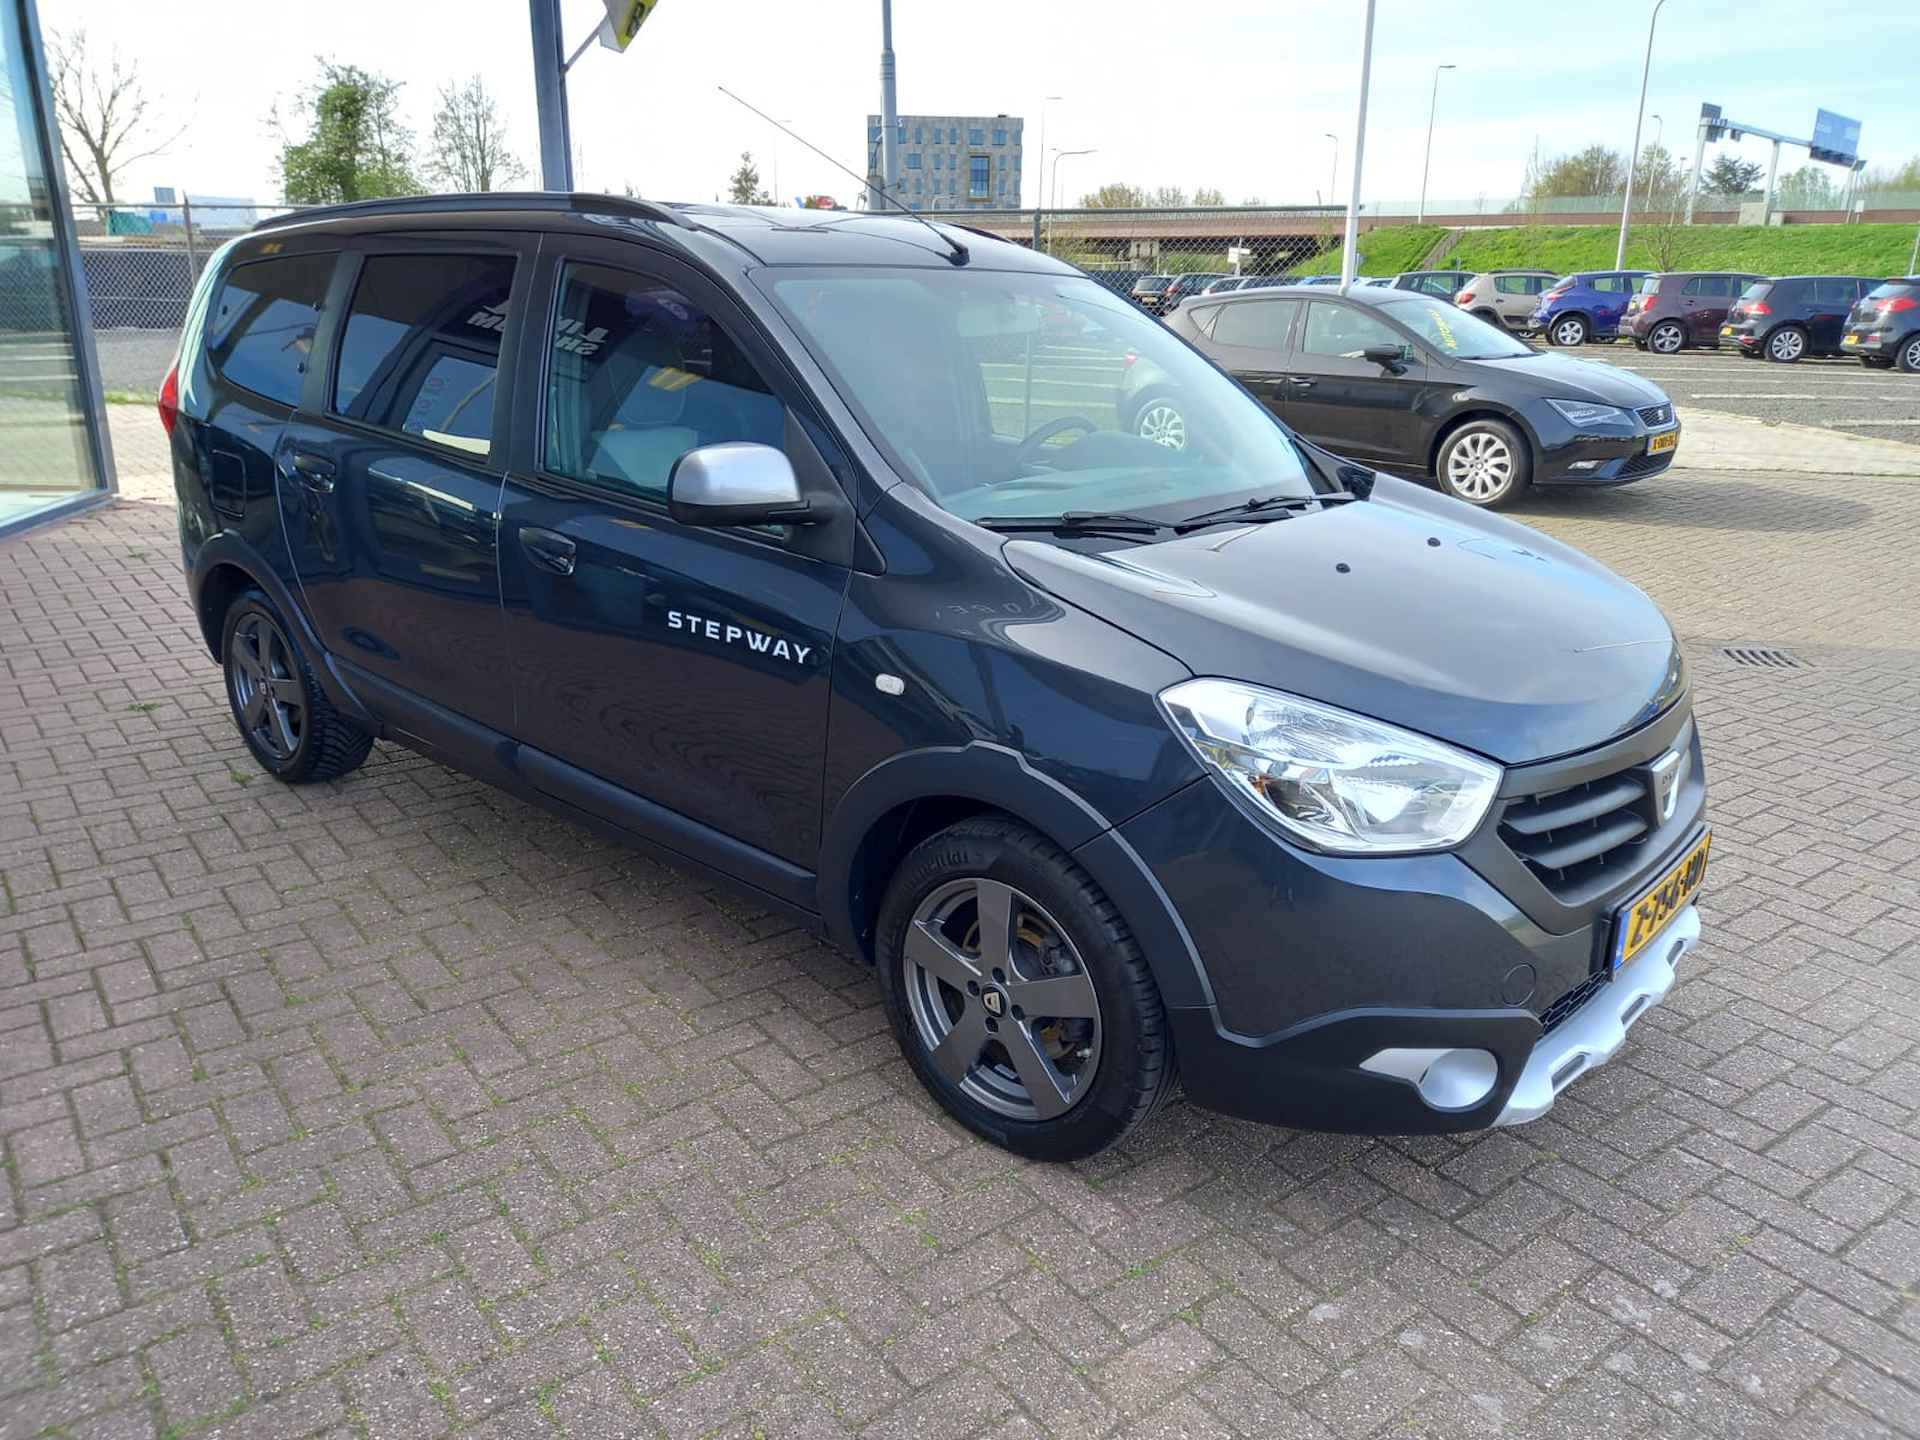 Dacia Lodgy 1.2 TCe Série Limitée Stepway 7p. Airco, Multimedia systeem, Navigatie, Cruise control, Bluetooth telefoonverbinding, Parkeersen Nette auto, BOVAG - 4/27